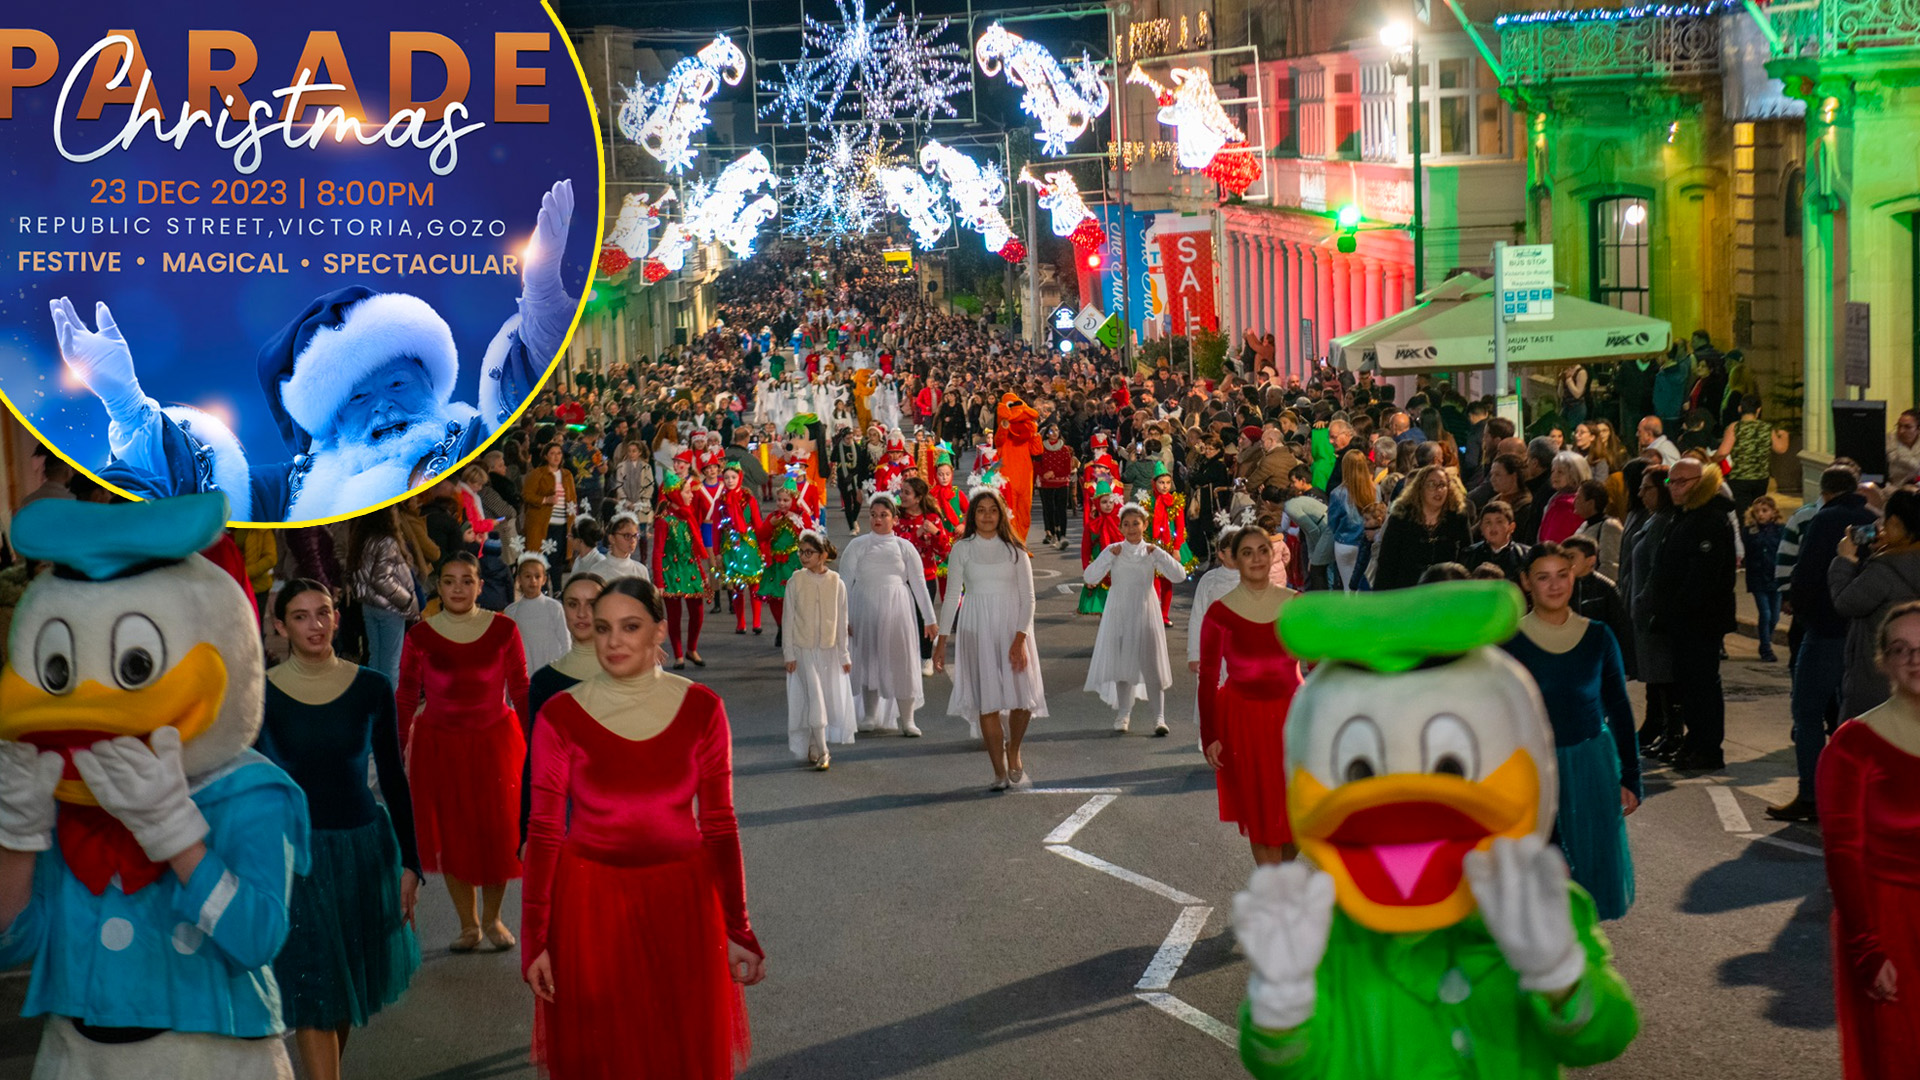 Gozo's Magical Christmas Parade: A Symphony of Lights, Music, and Joy!